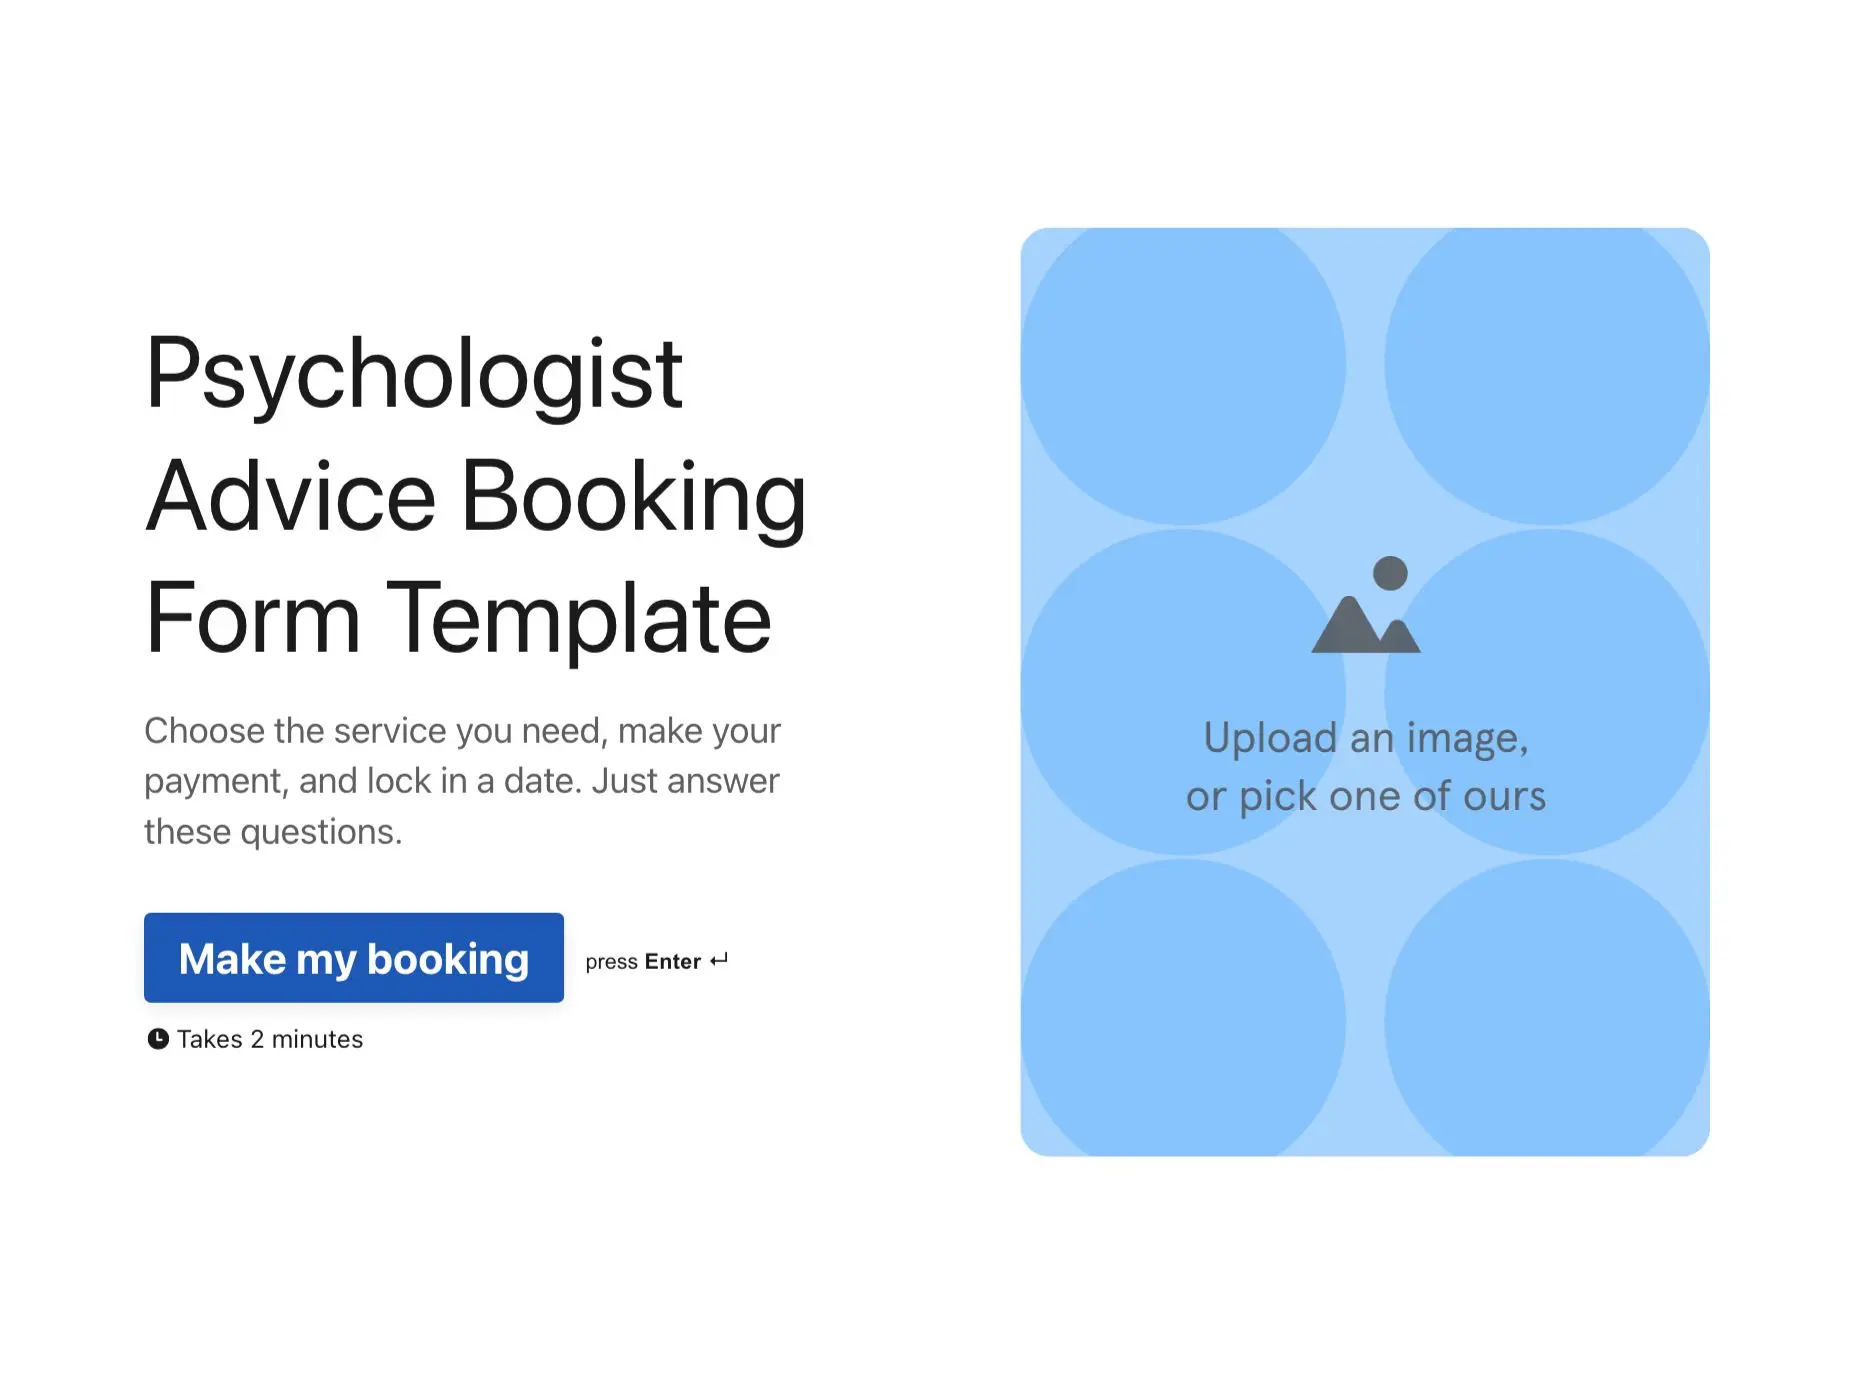 Psychologist Advice Booking Form Template Hero